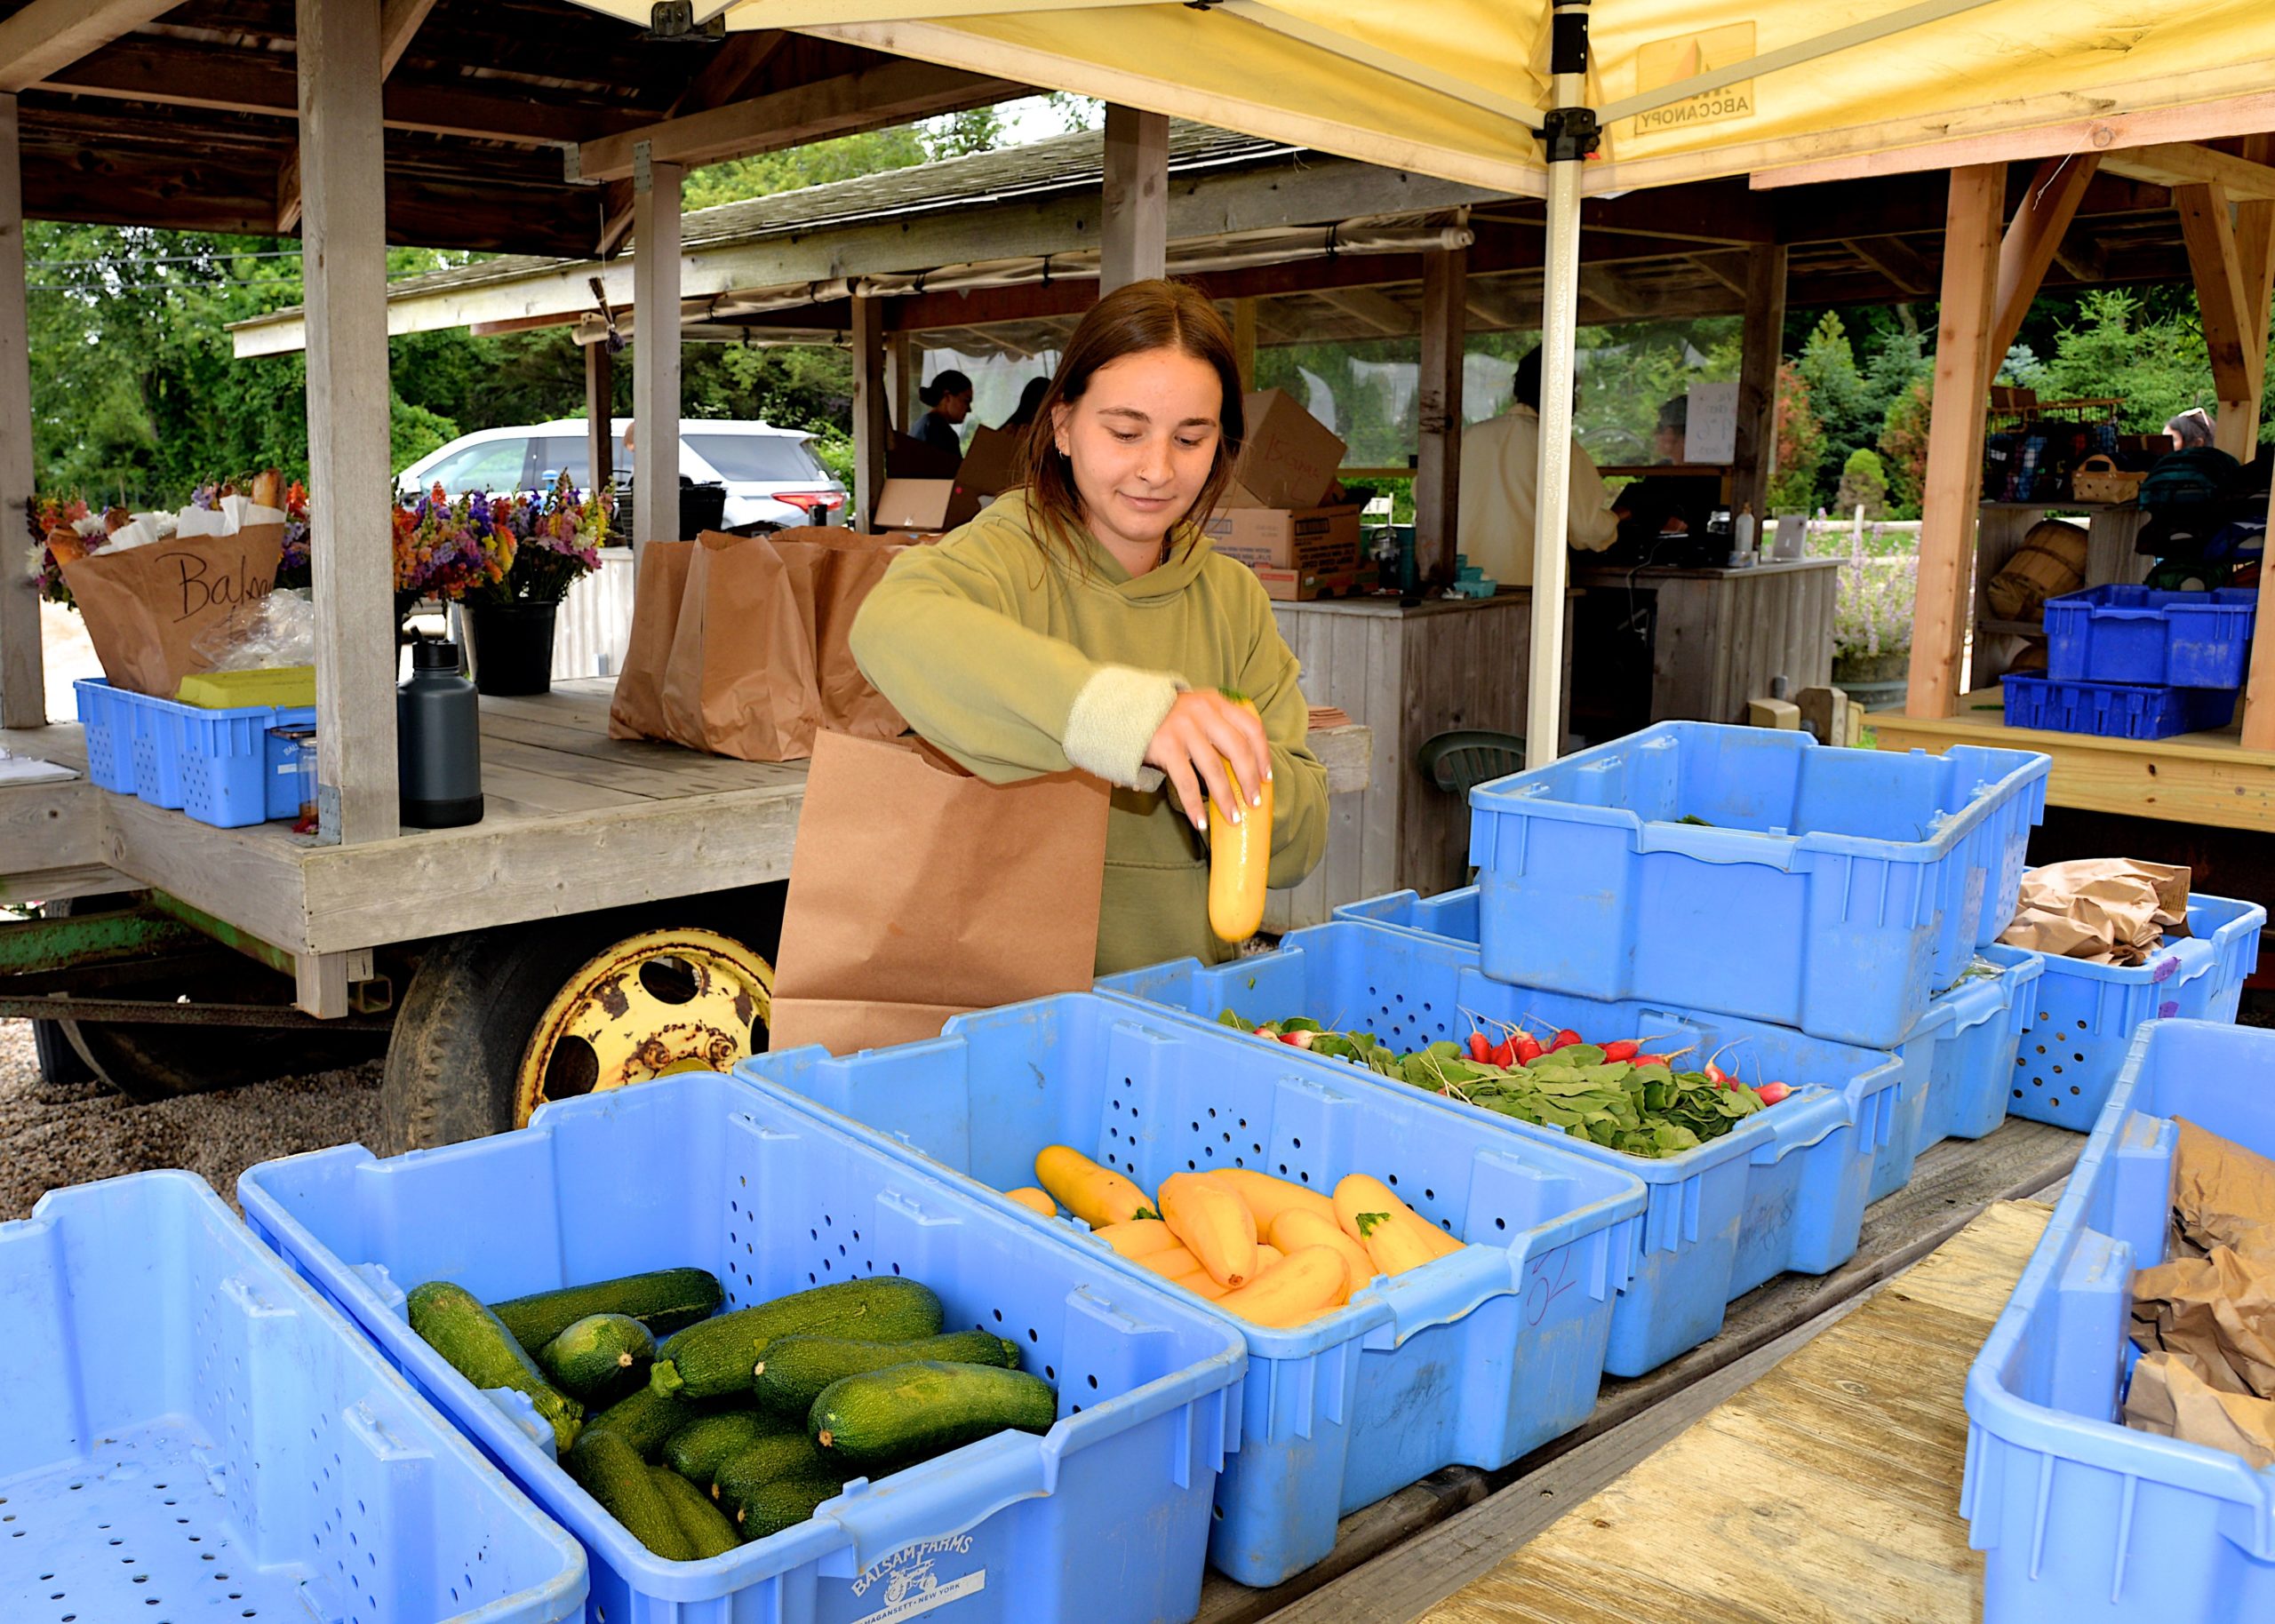 Emily Hecht prepares bags for CSA pickup at Balsam Farms.